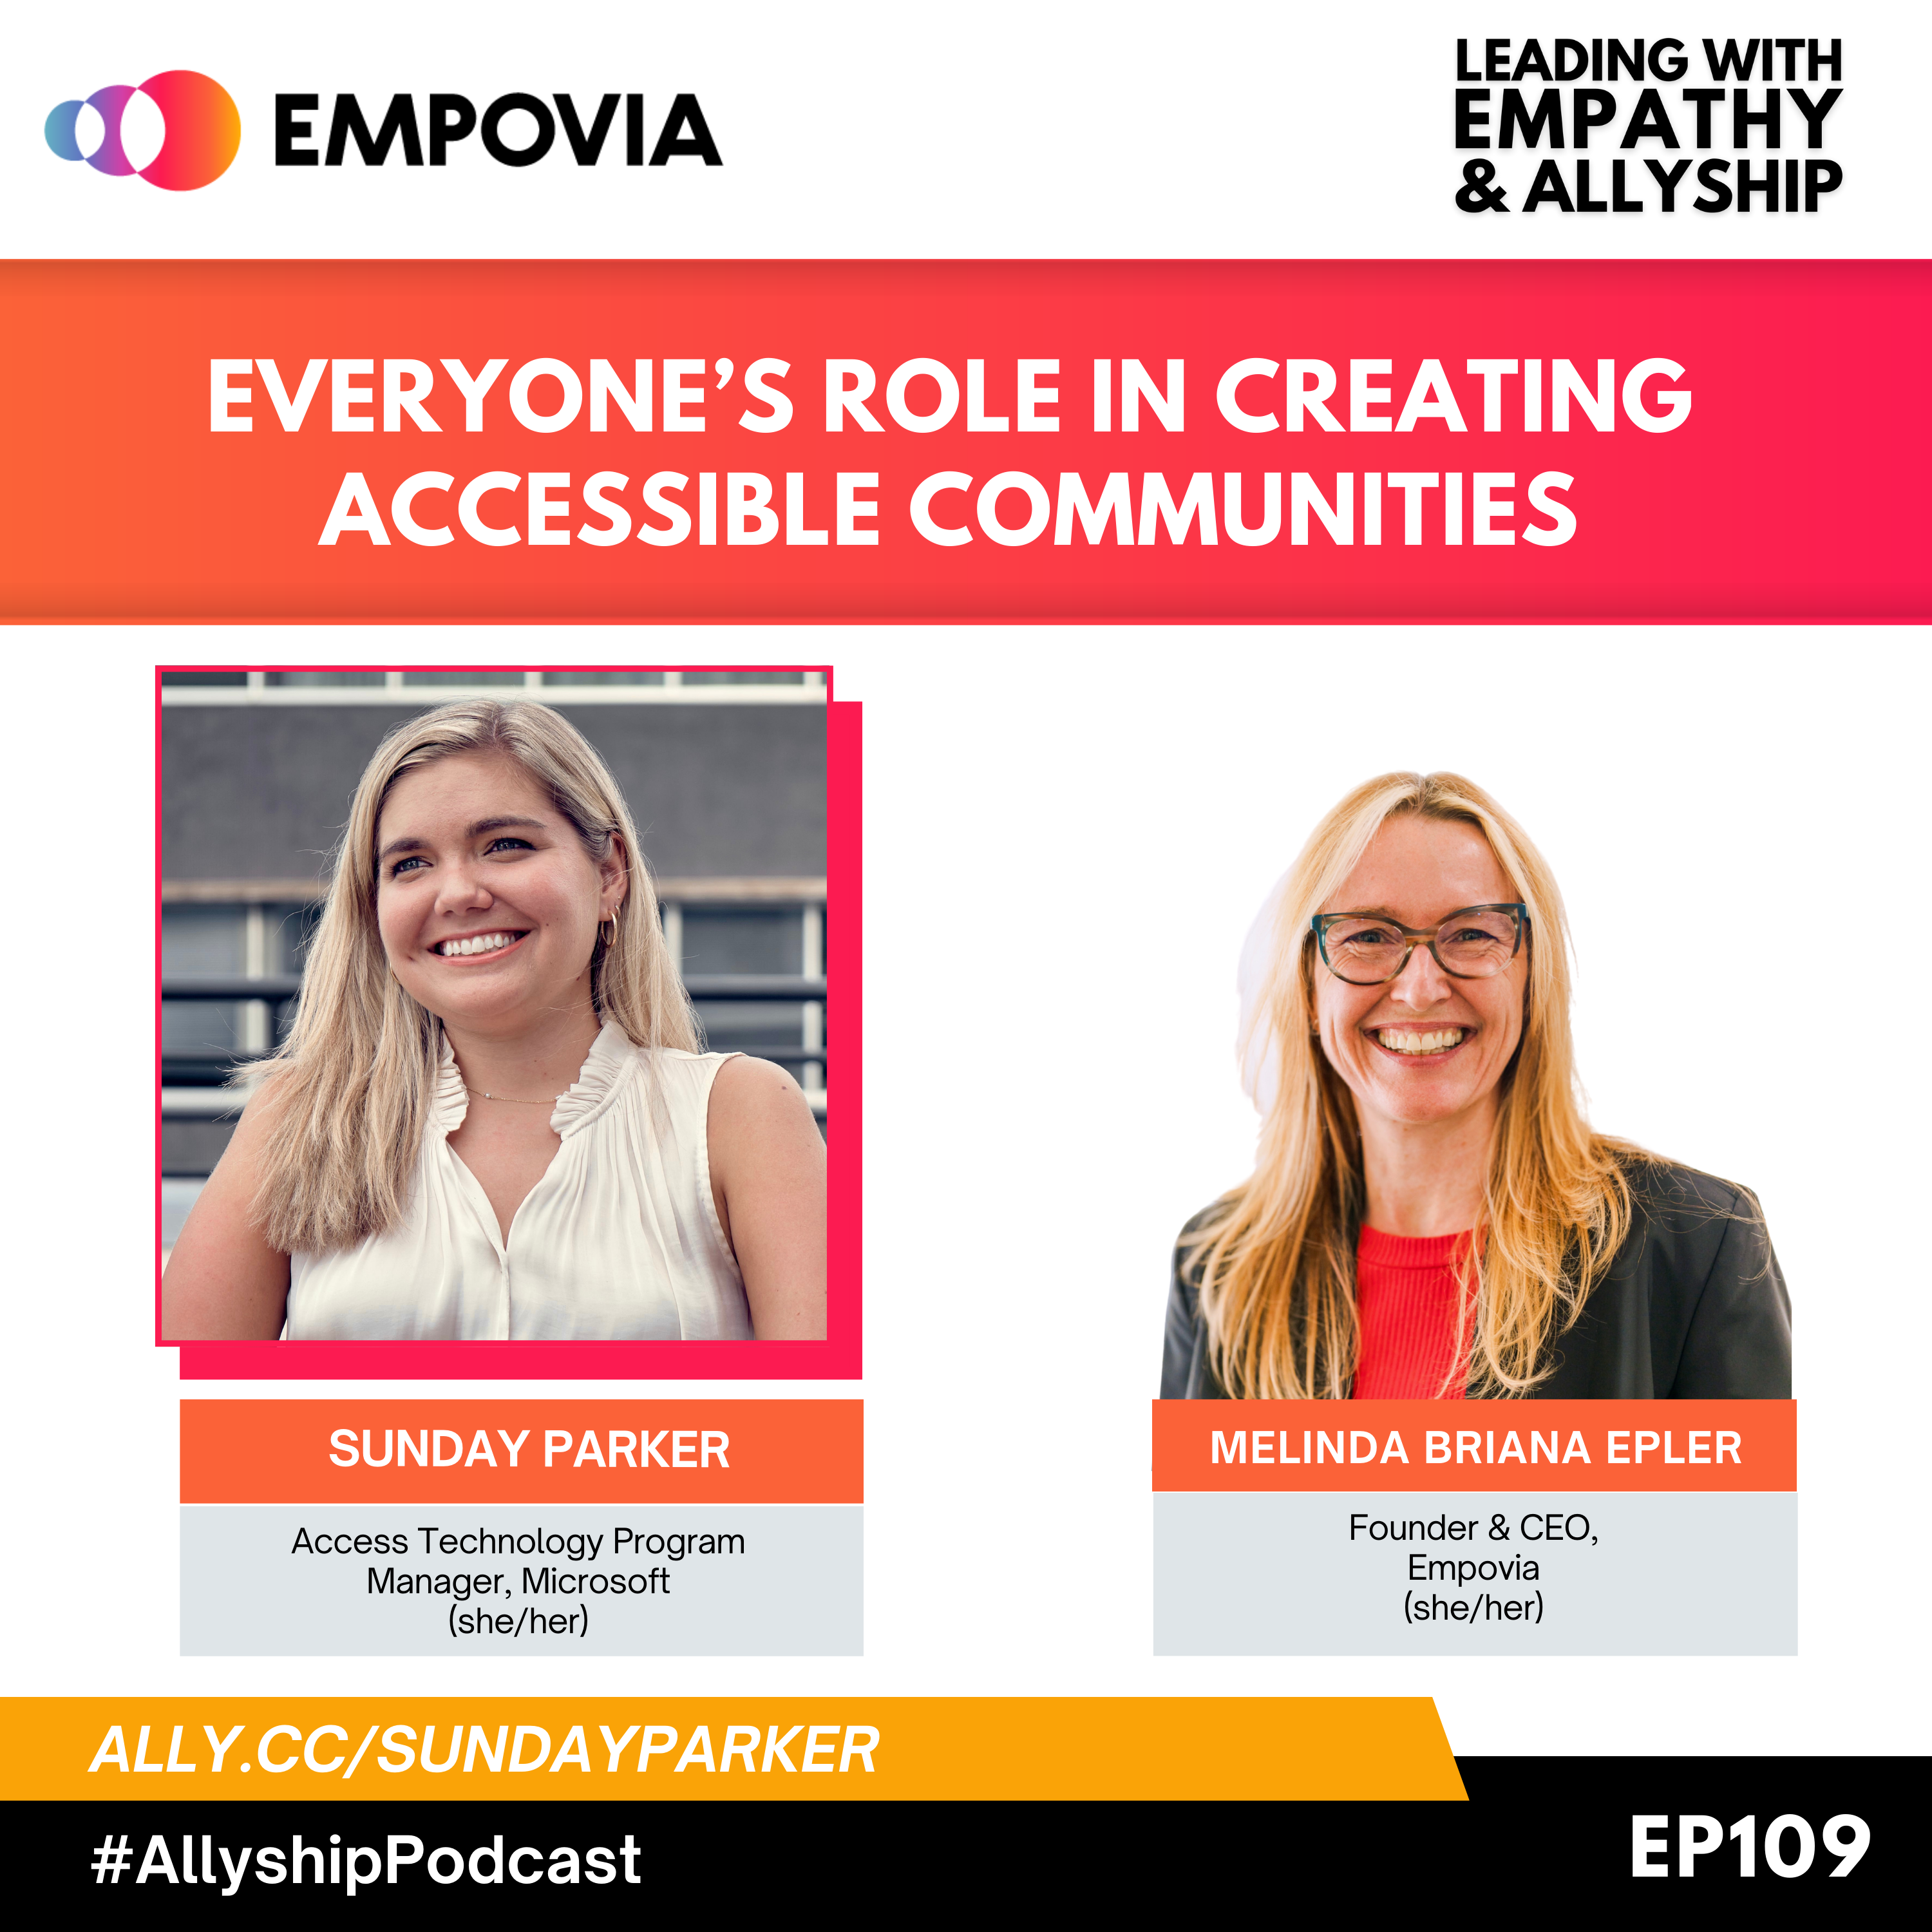 Leading With Empathy & Allyship promo with photos of Sunday Parker, a White female with medium-length blonde hair and cream sleeveless blouse, and host Melinda Briana Epler, a White woman with blonde and red hair, glasses, red shirt, and black jacket.